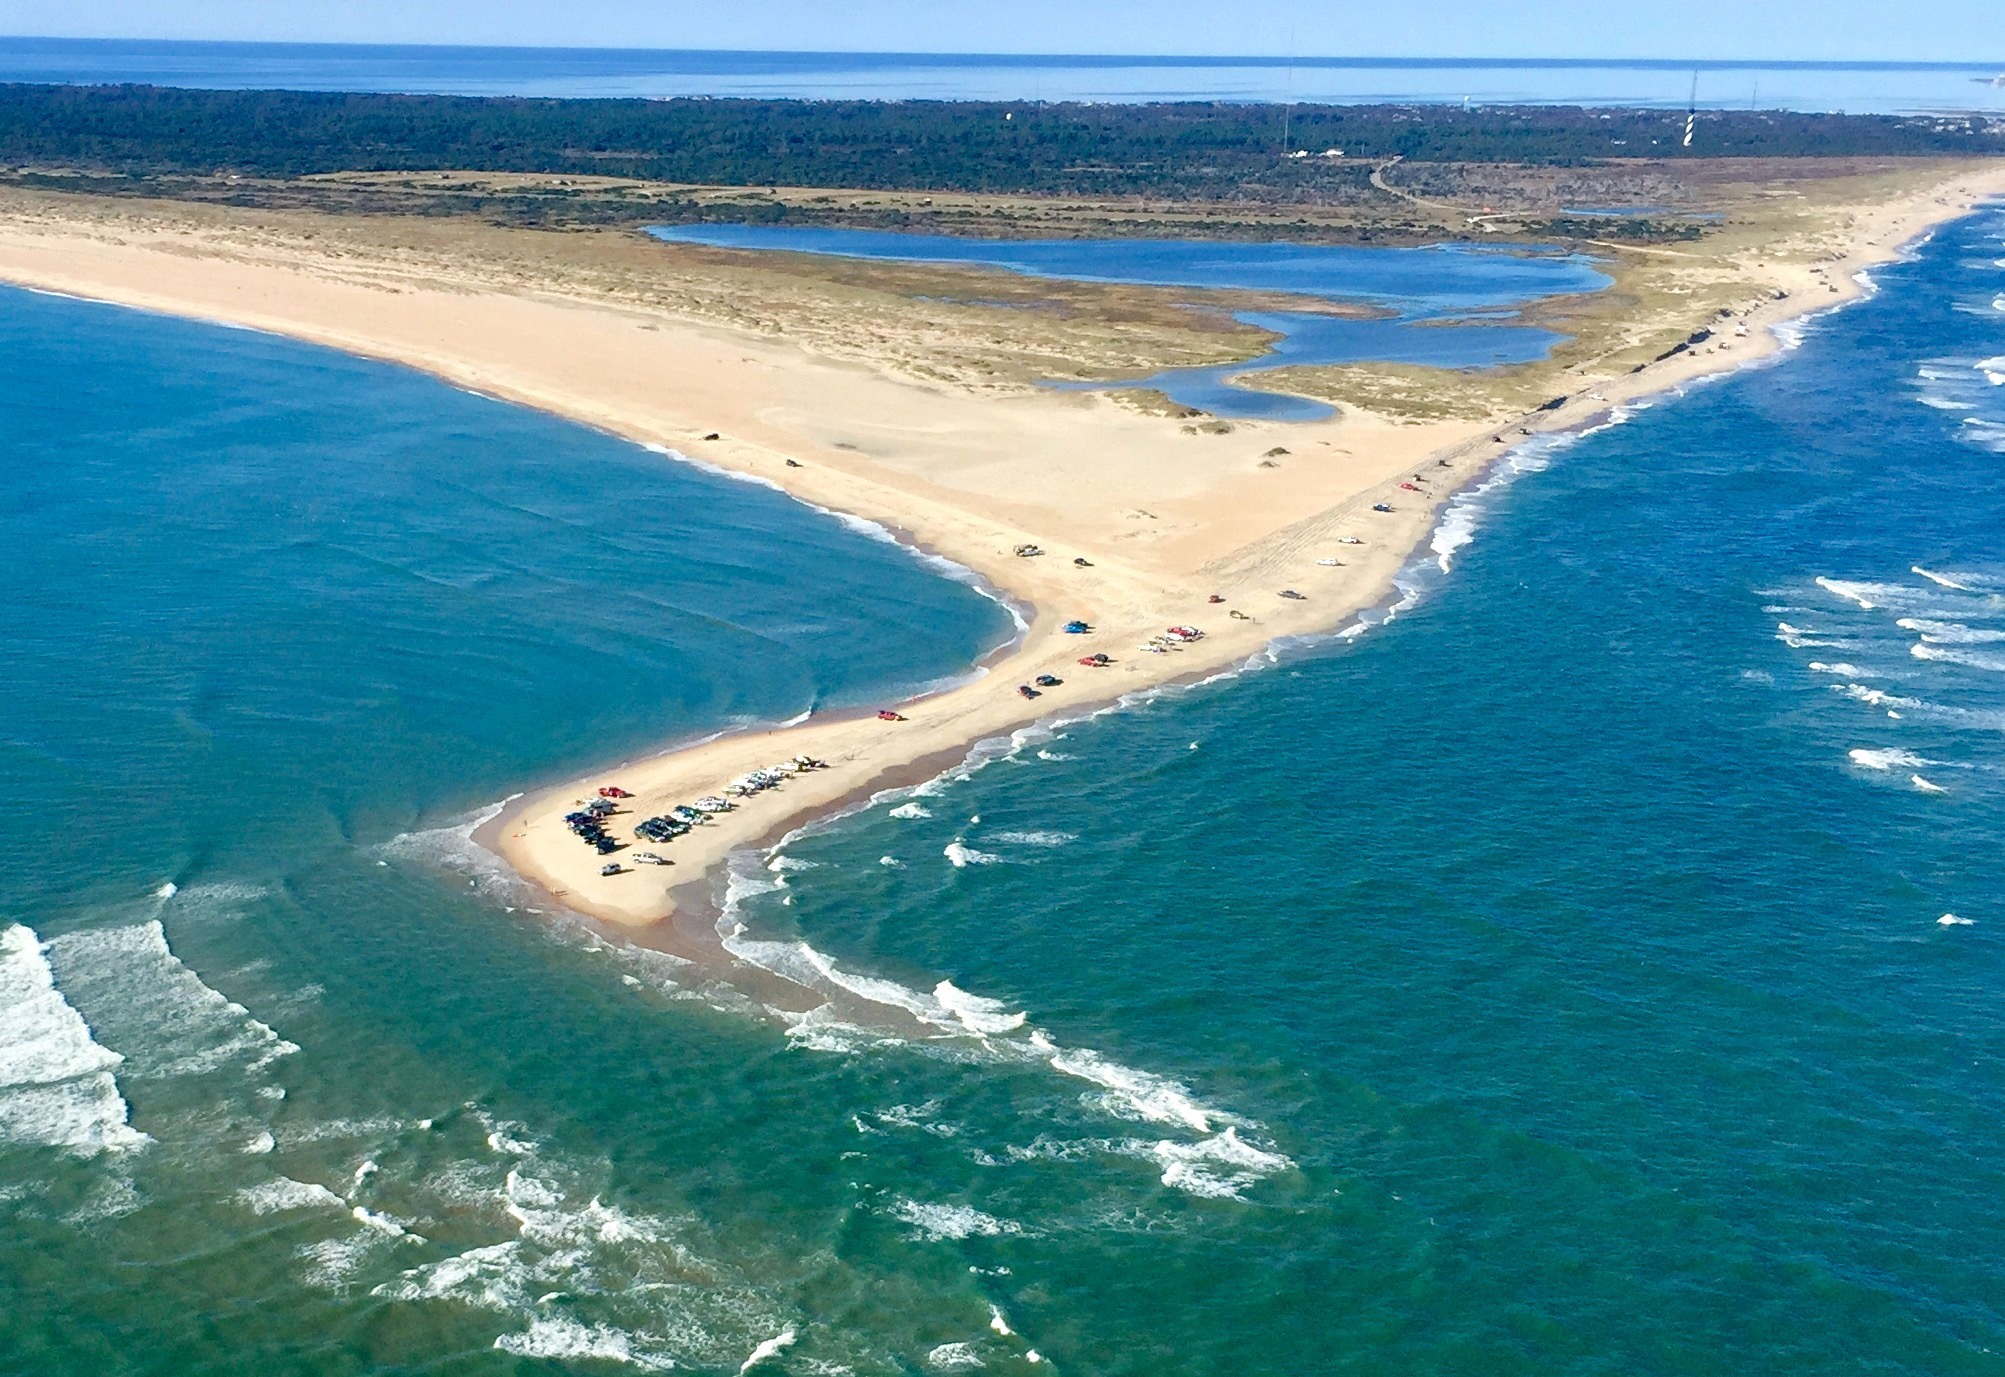 Beach-Driving-Cape-Hatteras-Outer-Banks